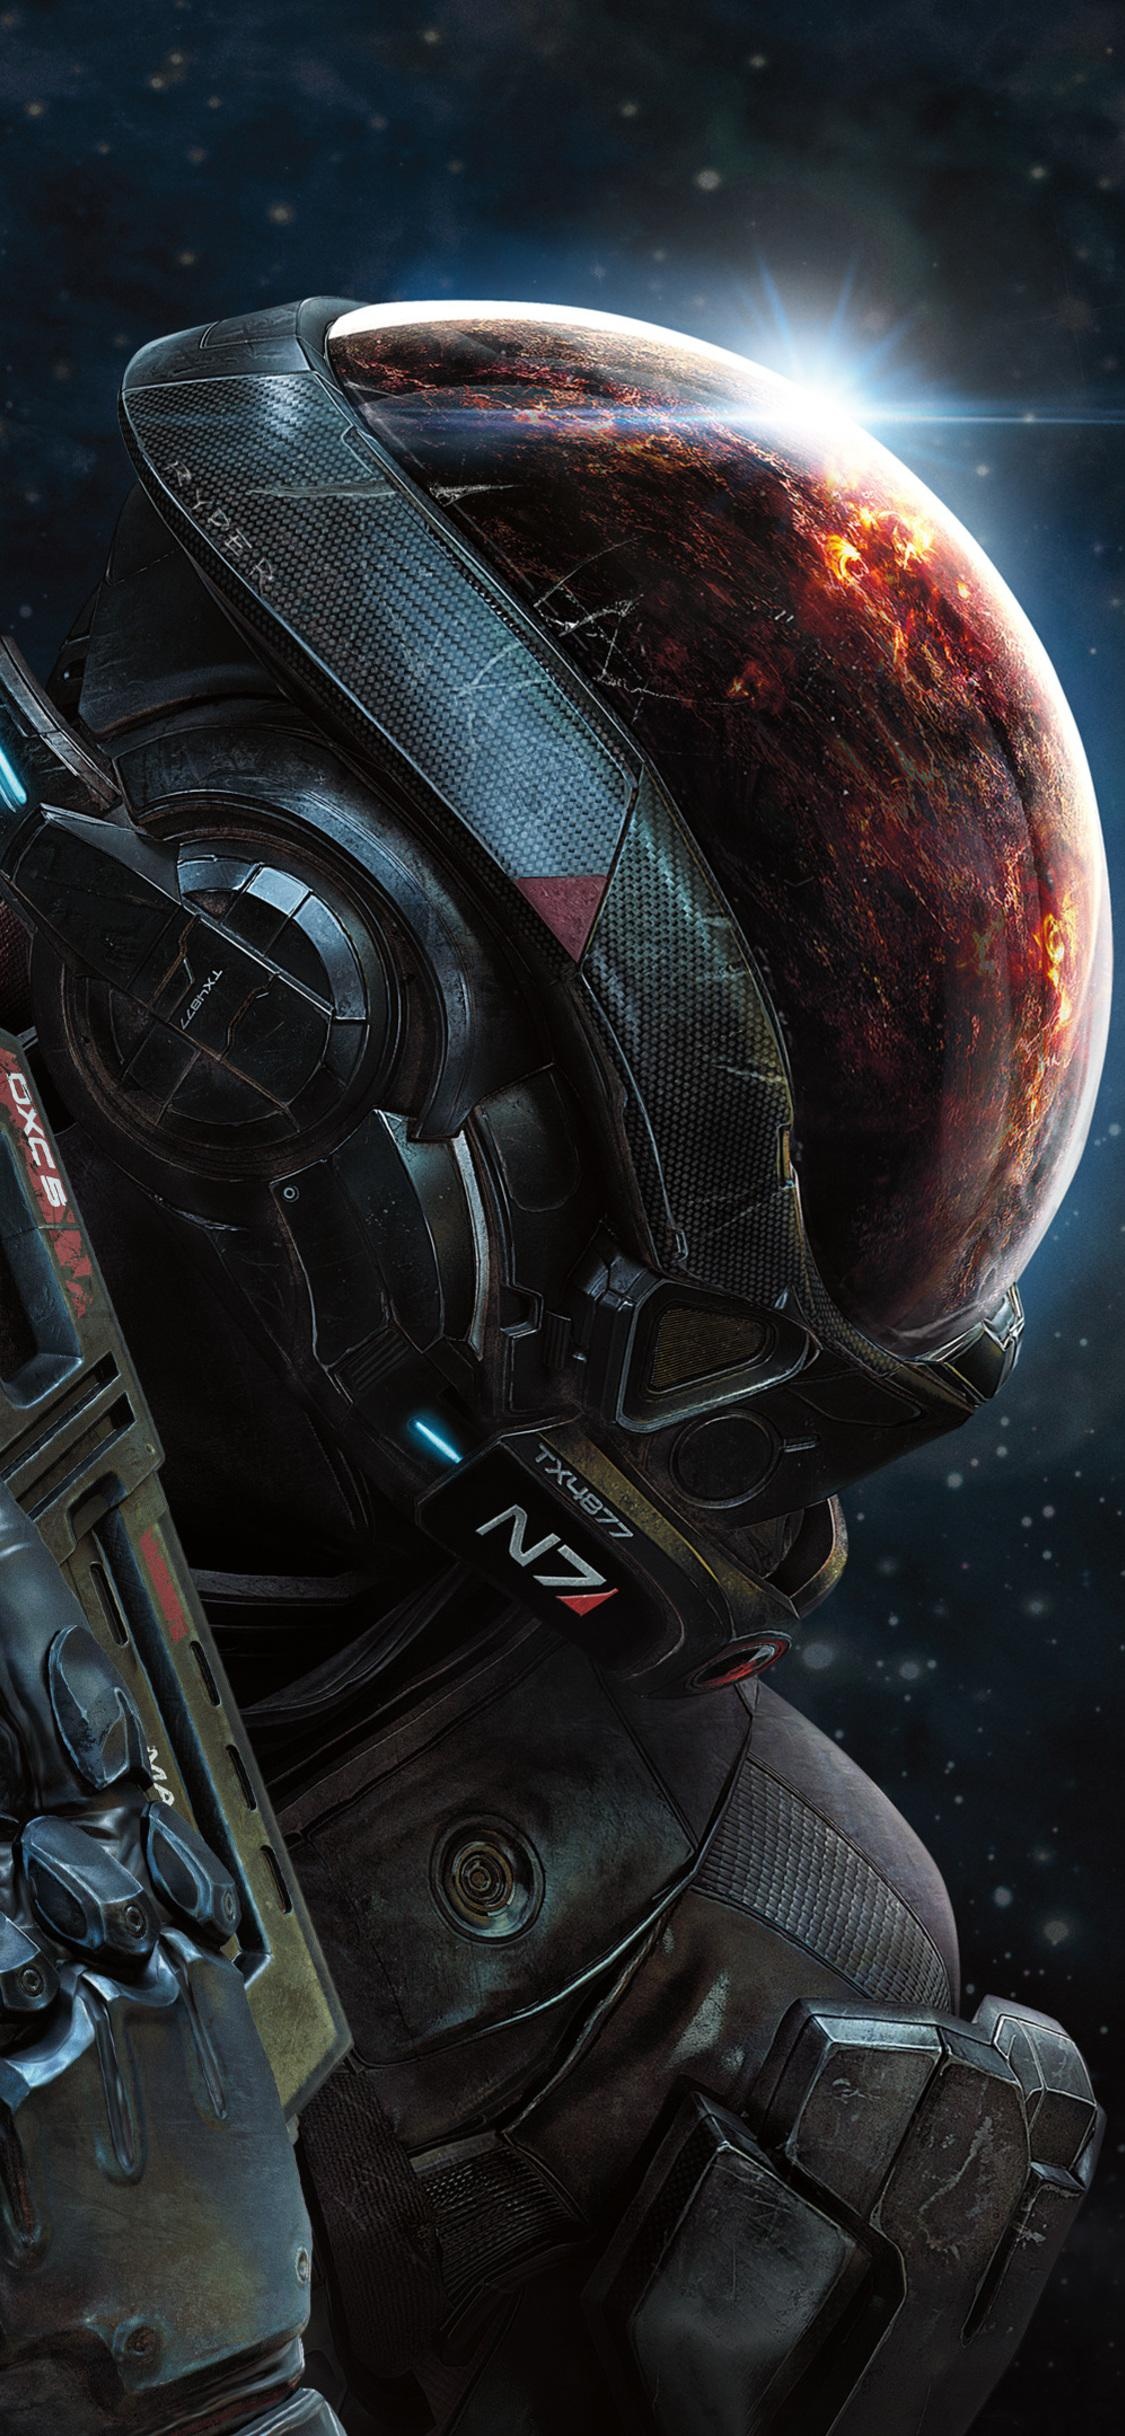 Mass Effect iPhone wallpapers, Gaming-themed wallpapers, High-quality images, Artistic designs, 1130x2440 HD Phone